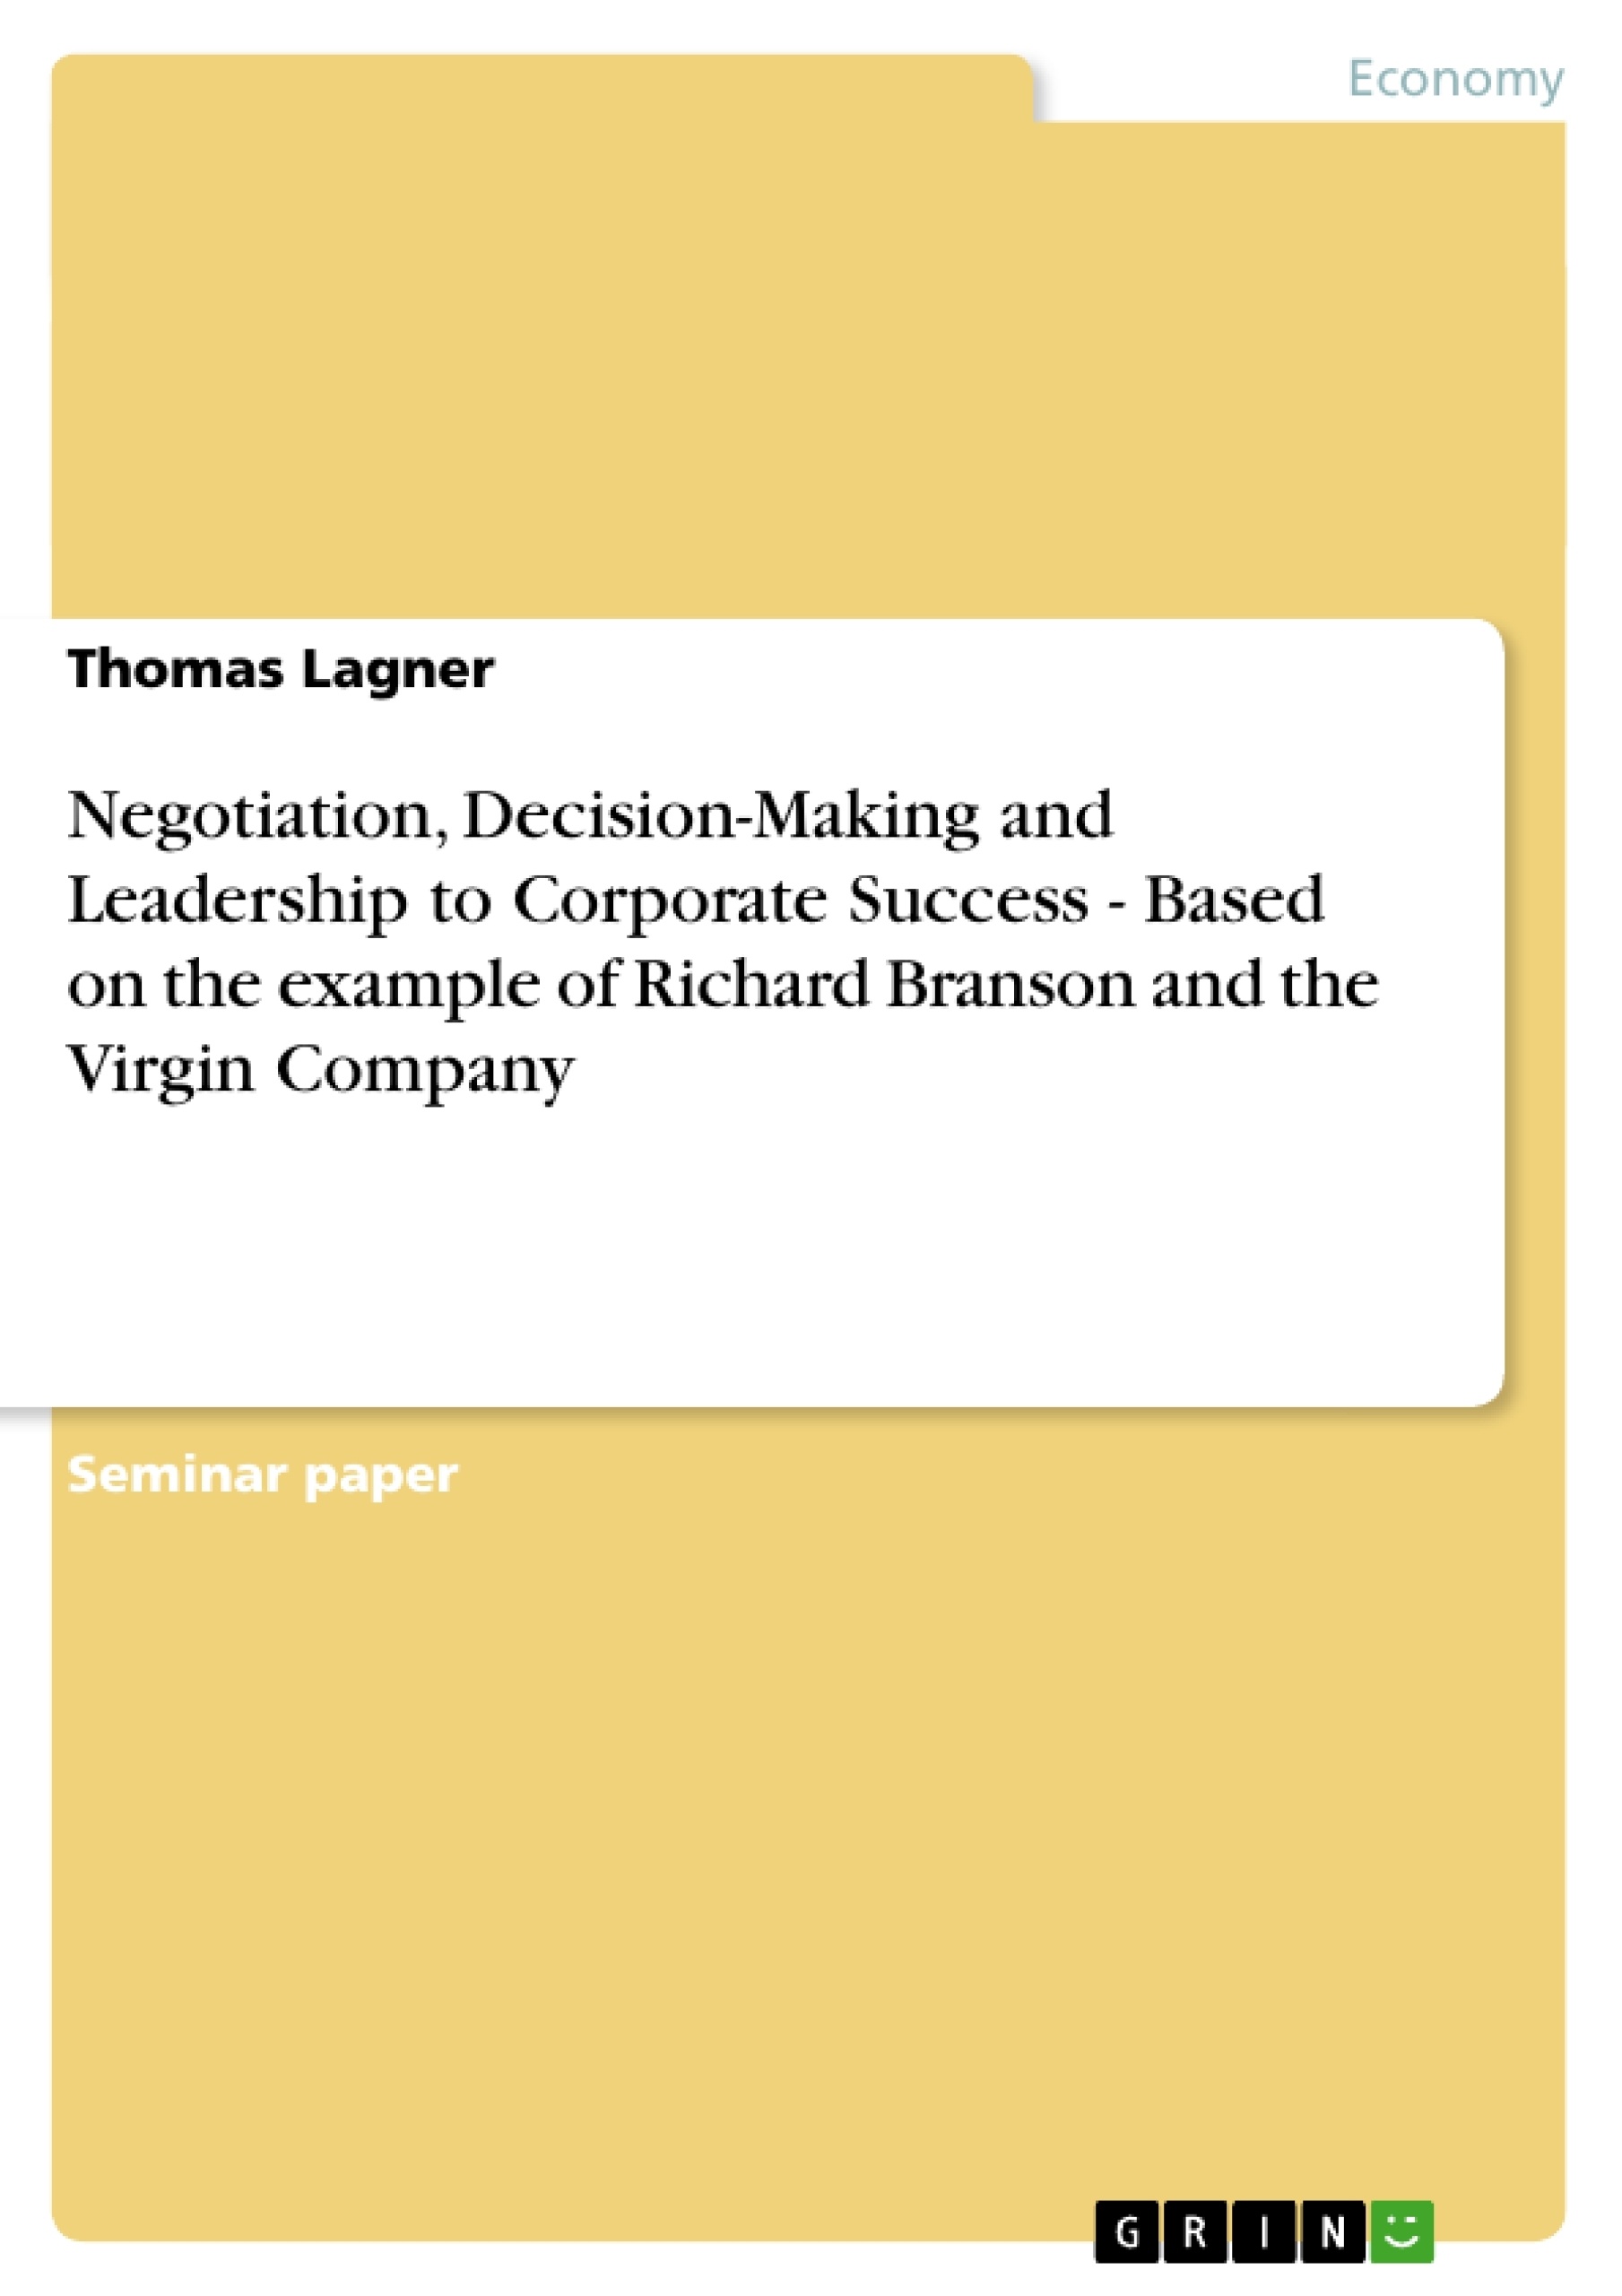 Titre: Negotiation, Decision-Making and Leadership to Corporate Success - Based on the example of Richard Branson and the Virgin Company